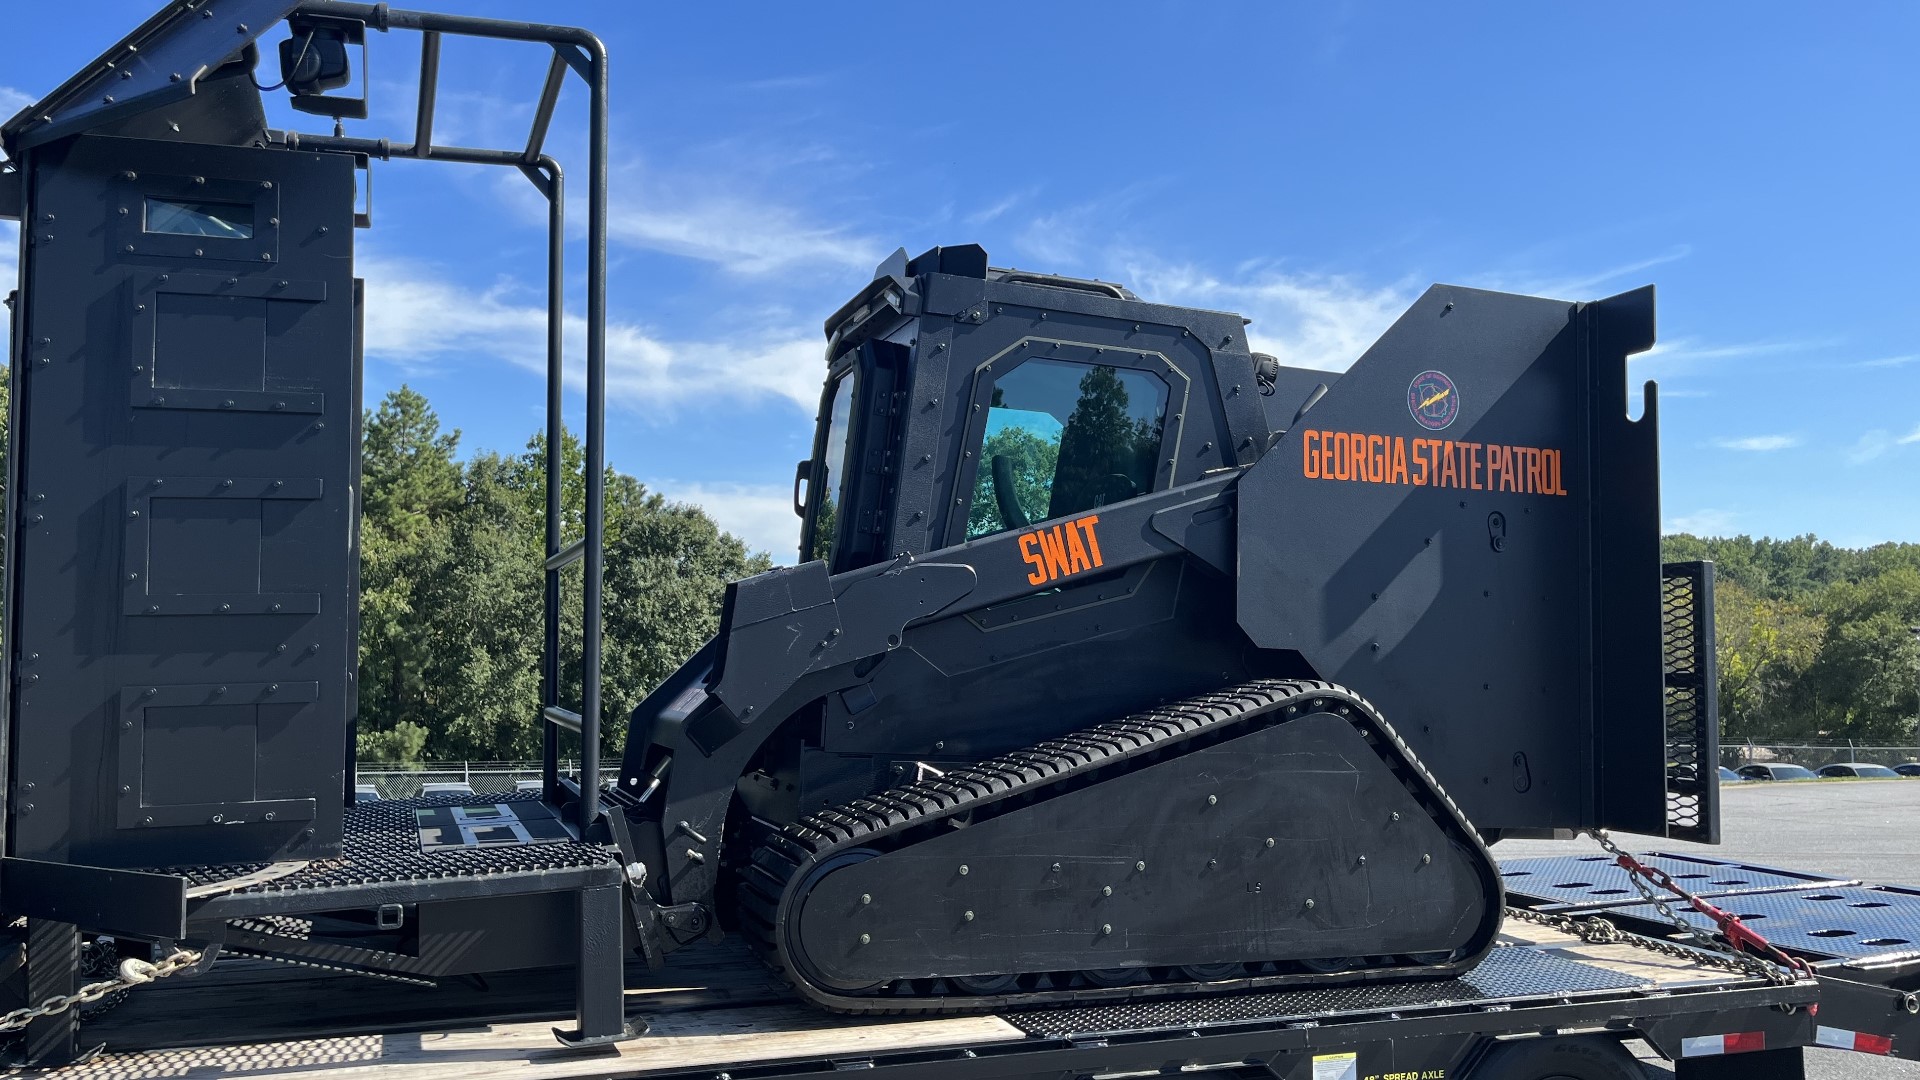 Georgia State Patrol SWAT has the only armored skid-steer in the state to assist agencies during crisis situations.